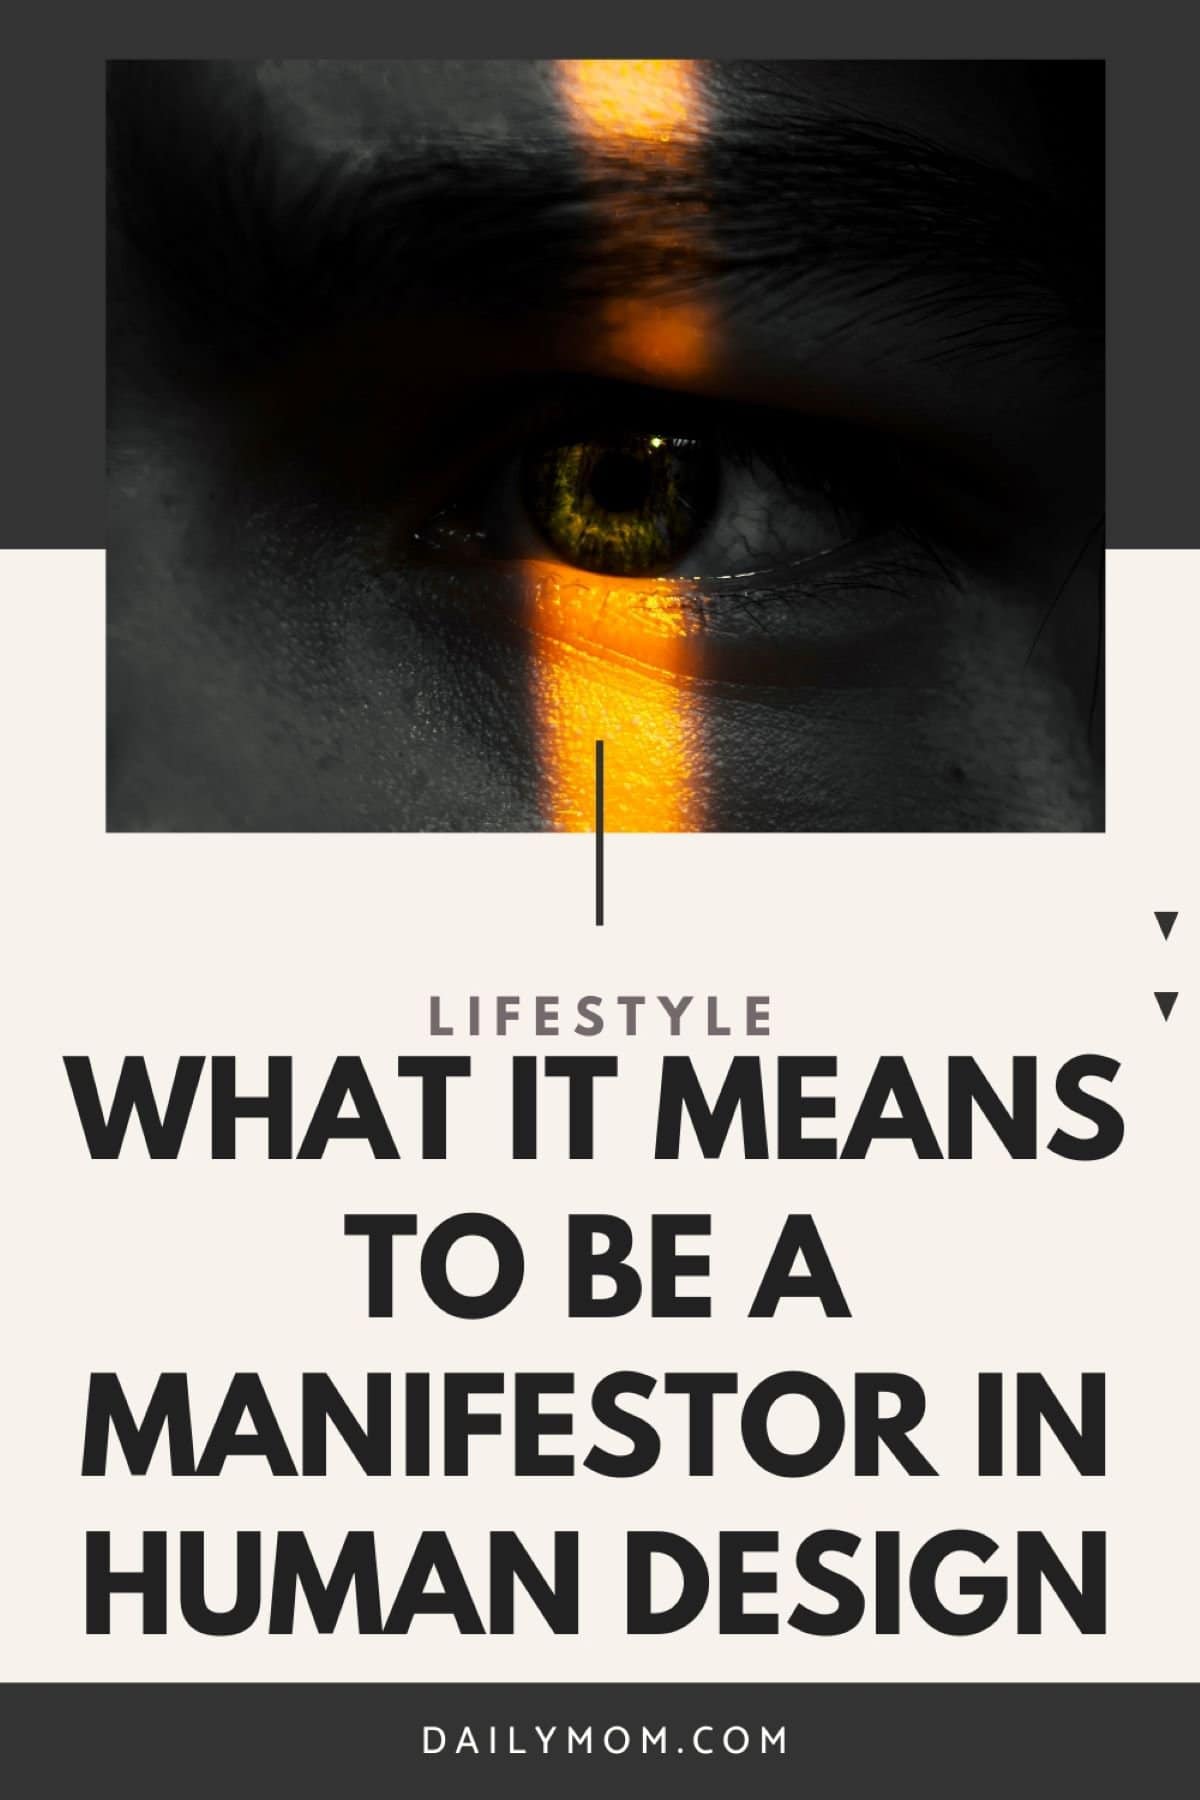 Human Design Manifestor: What It Means To Be A Manifestor Type - Life &Amp; Strategy  5 Daily Mom, Magazine For Families